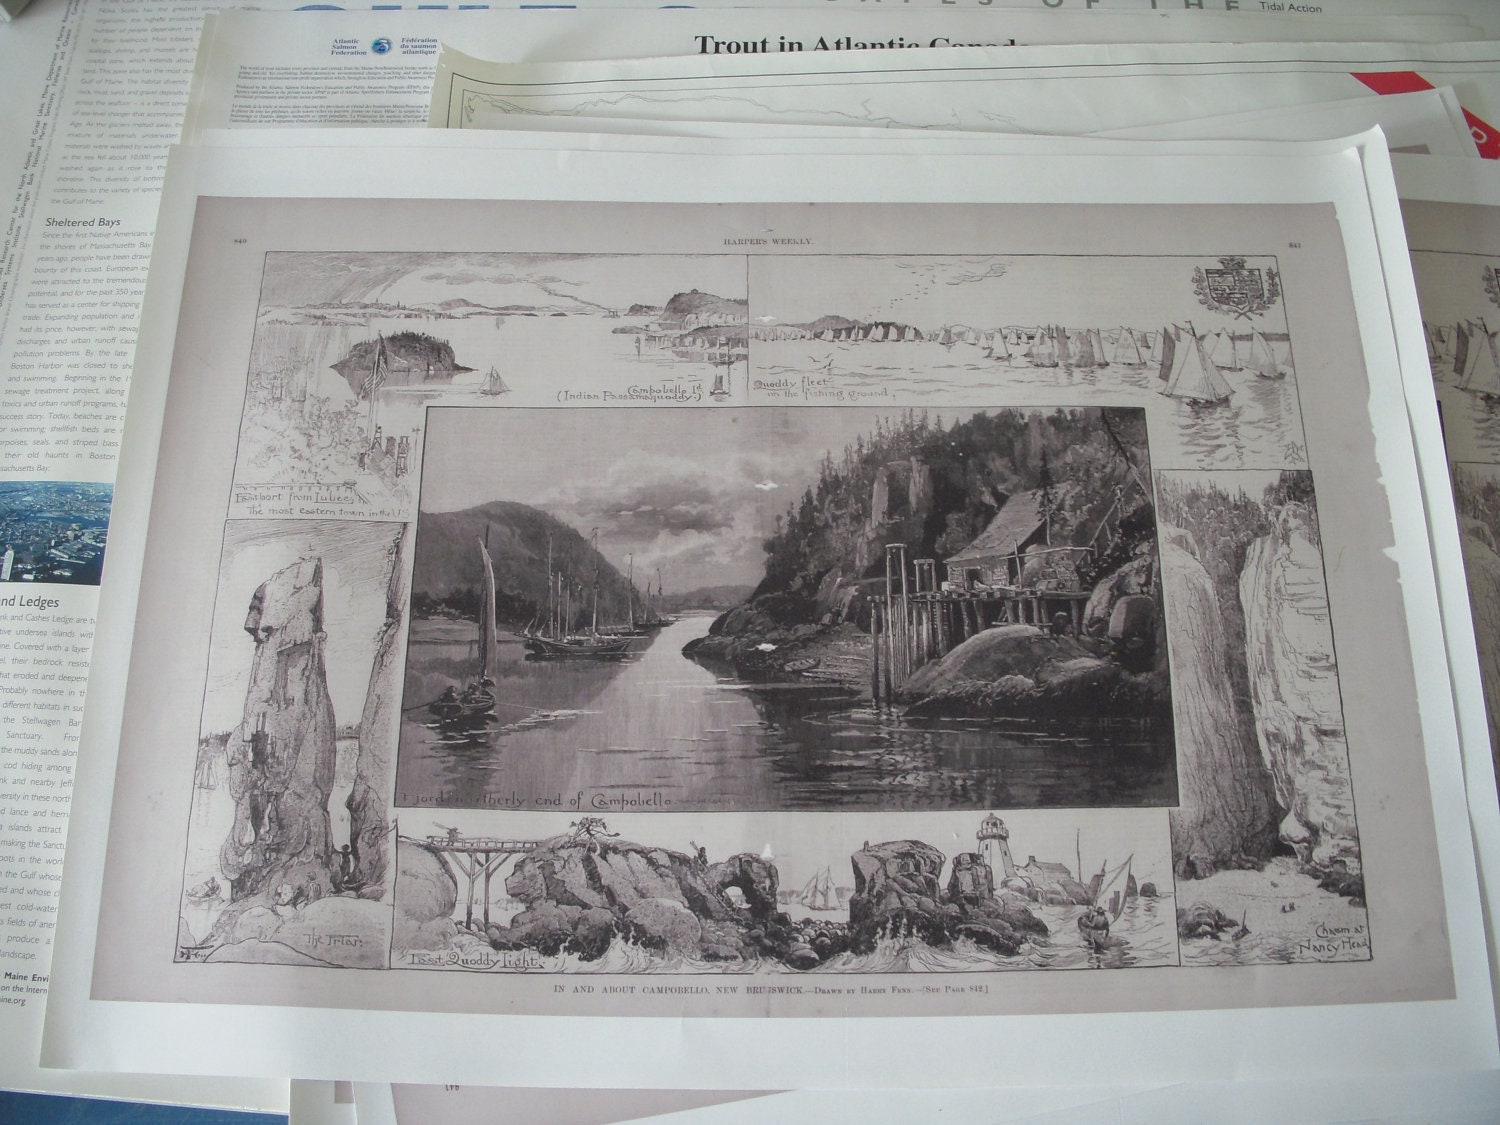 POSTER: Drawings of Campobello Island - Harper's Weekly late 1800s